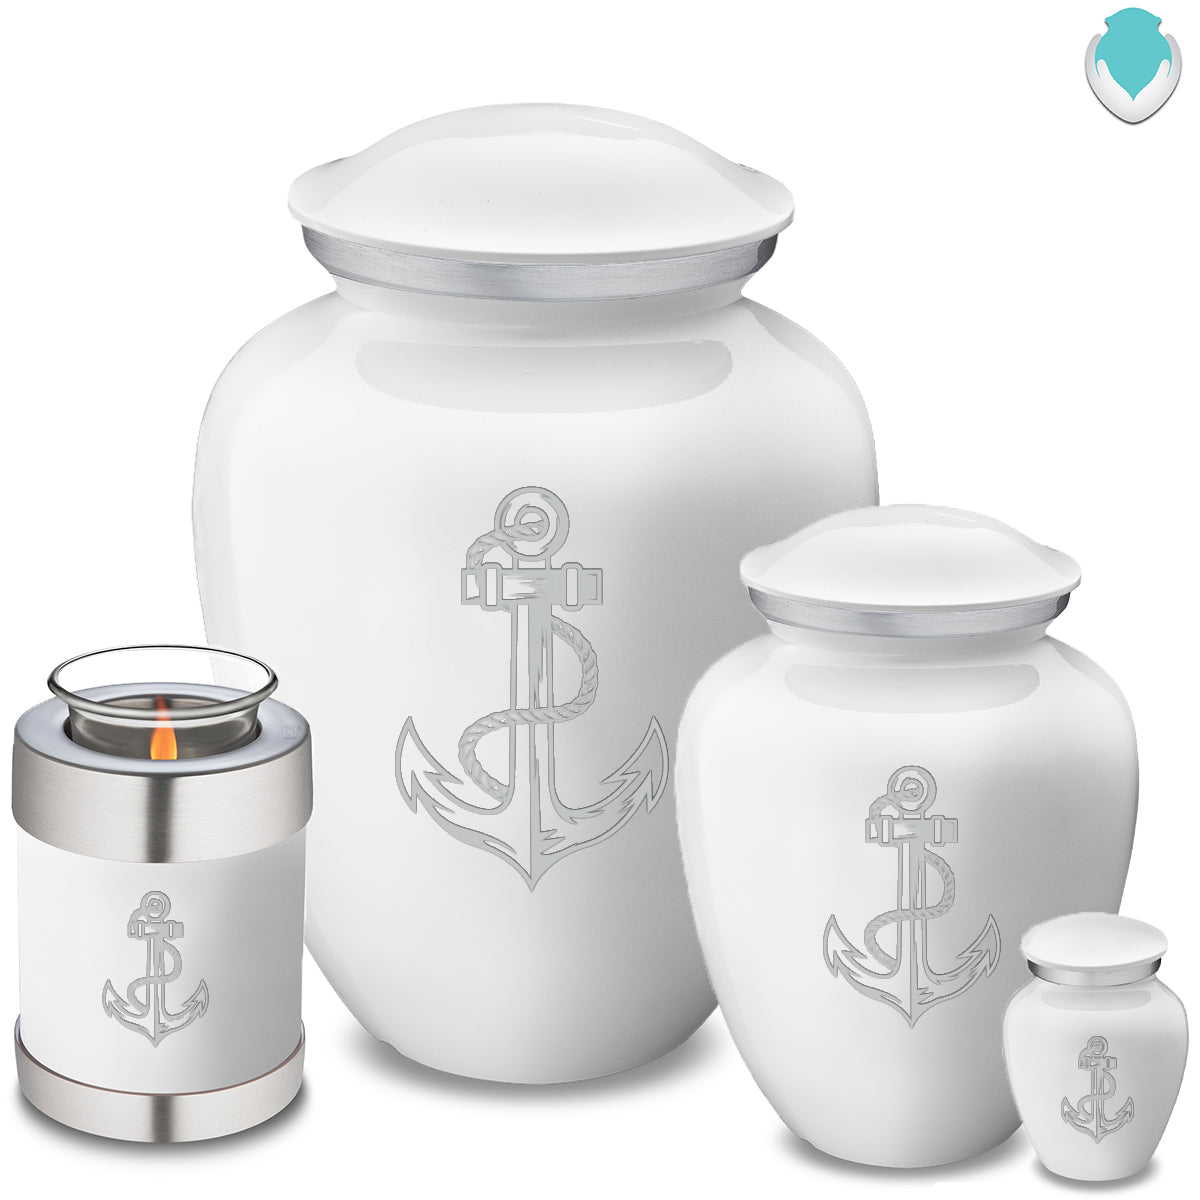 Candle Holder Embrace White Anchor Cremation Urn